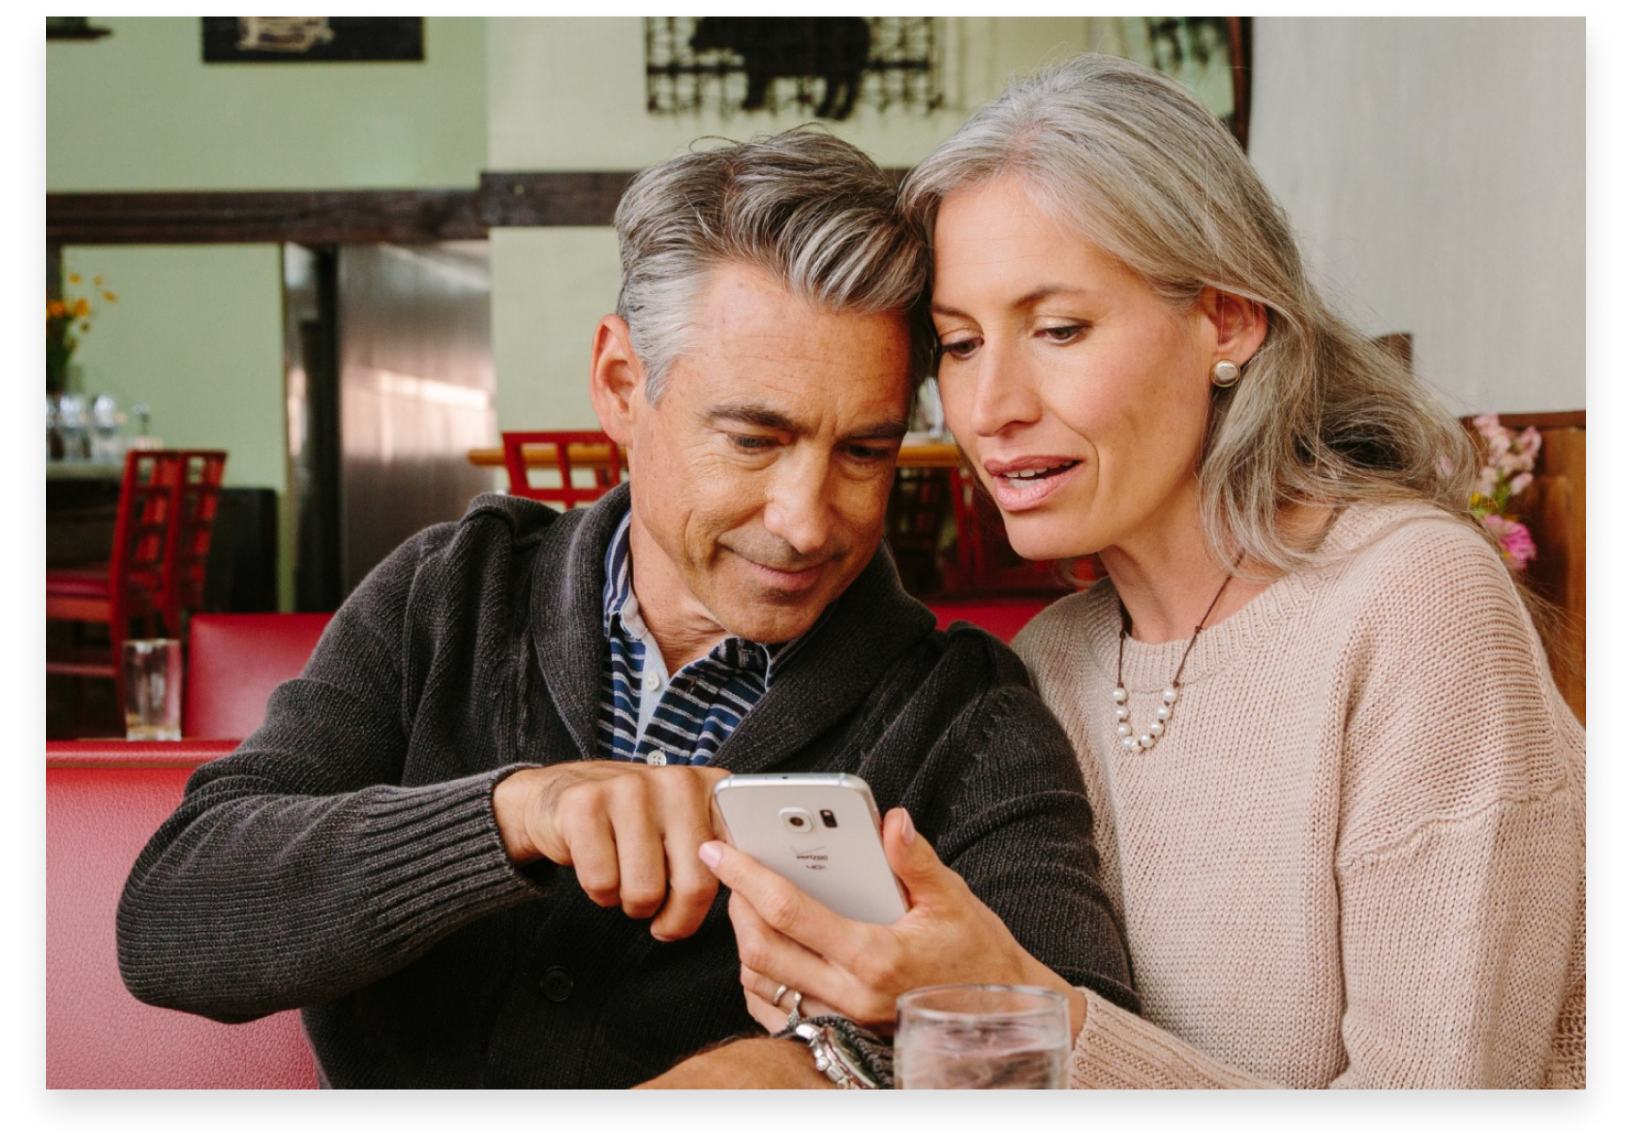 Woman and man reading information on a cell phone